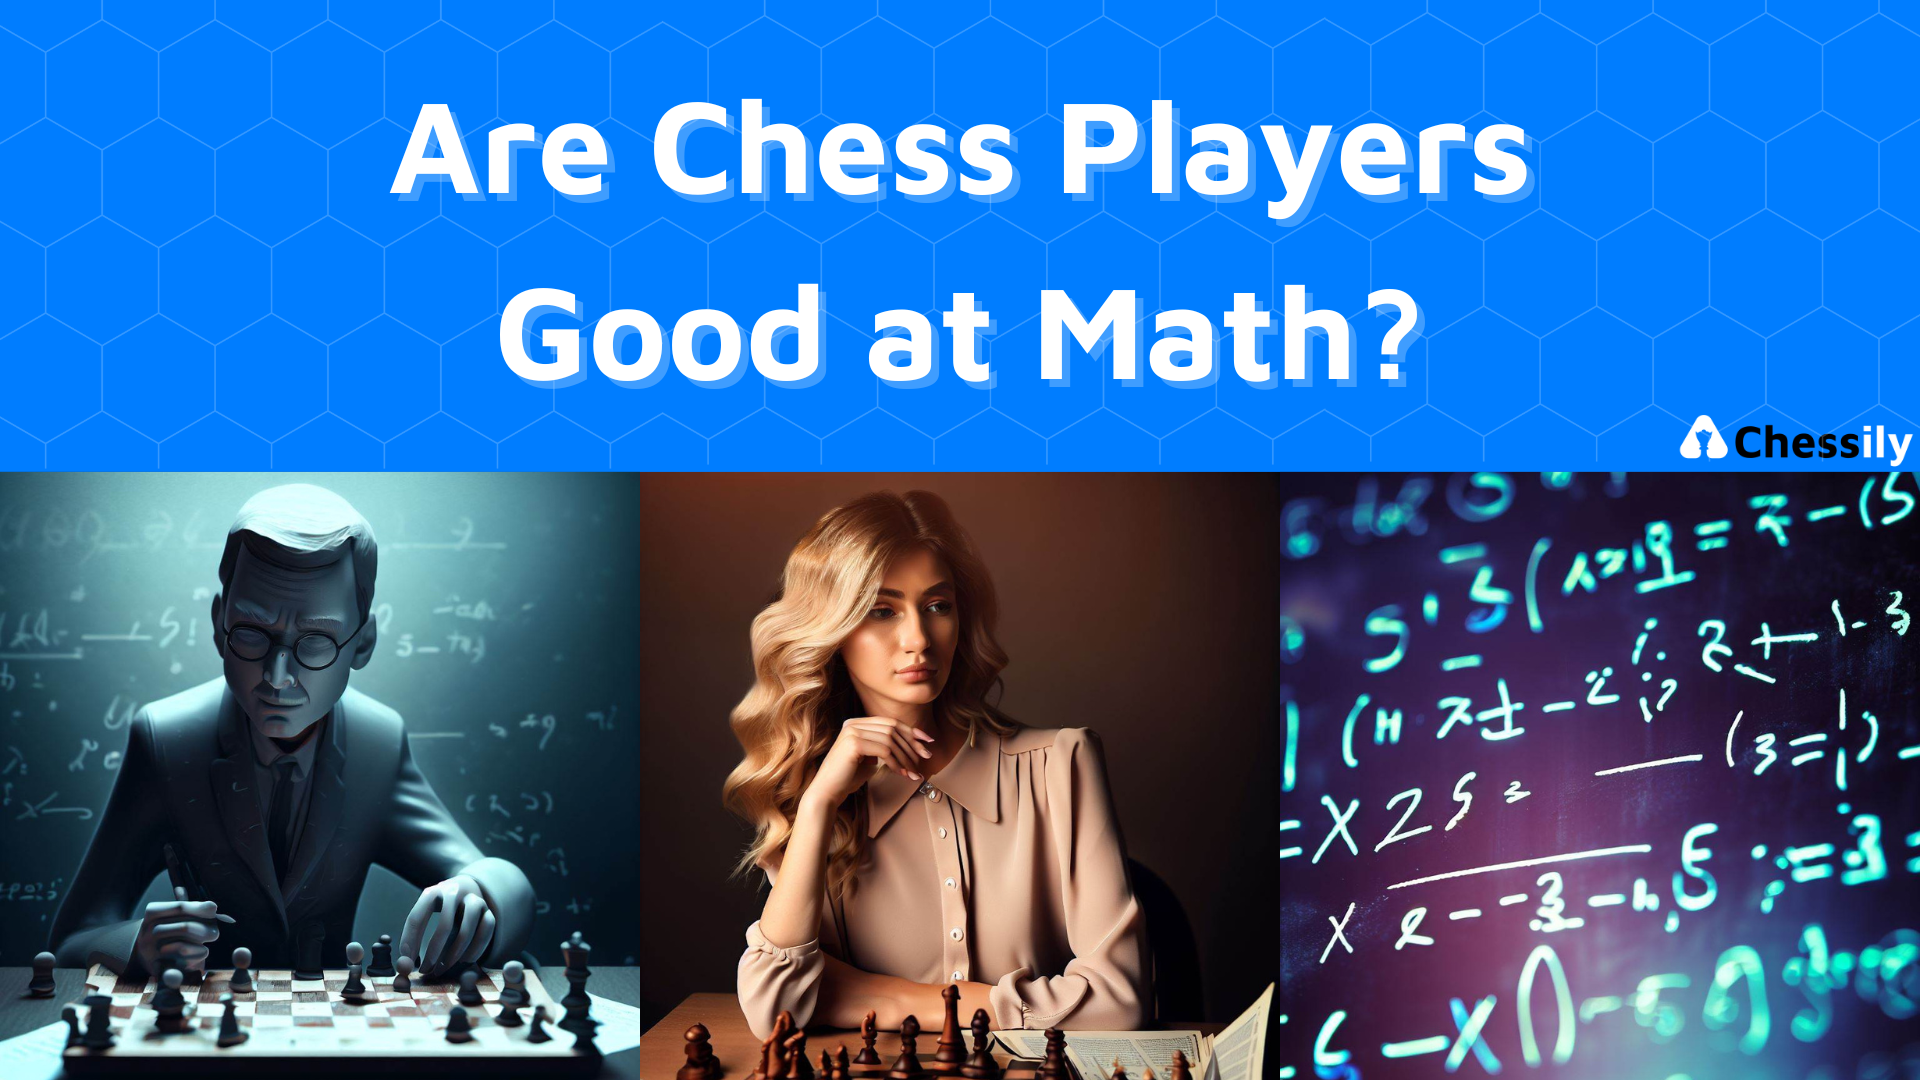 Are Chess Players Good at Math? - Chessily